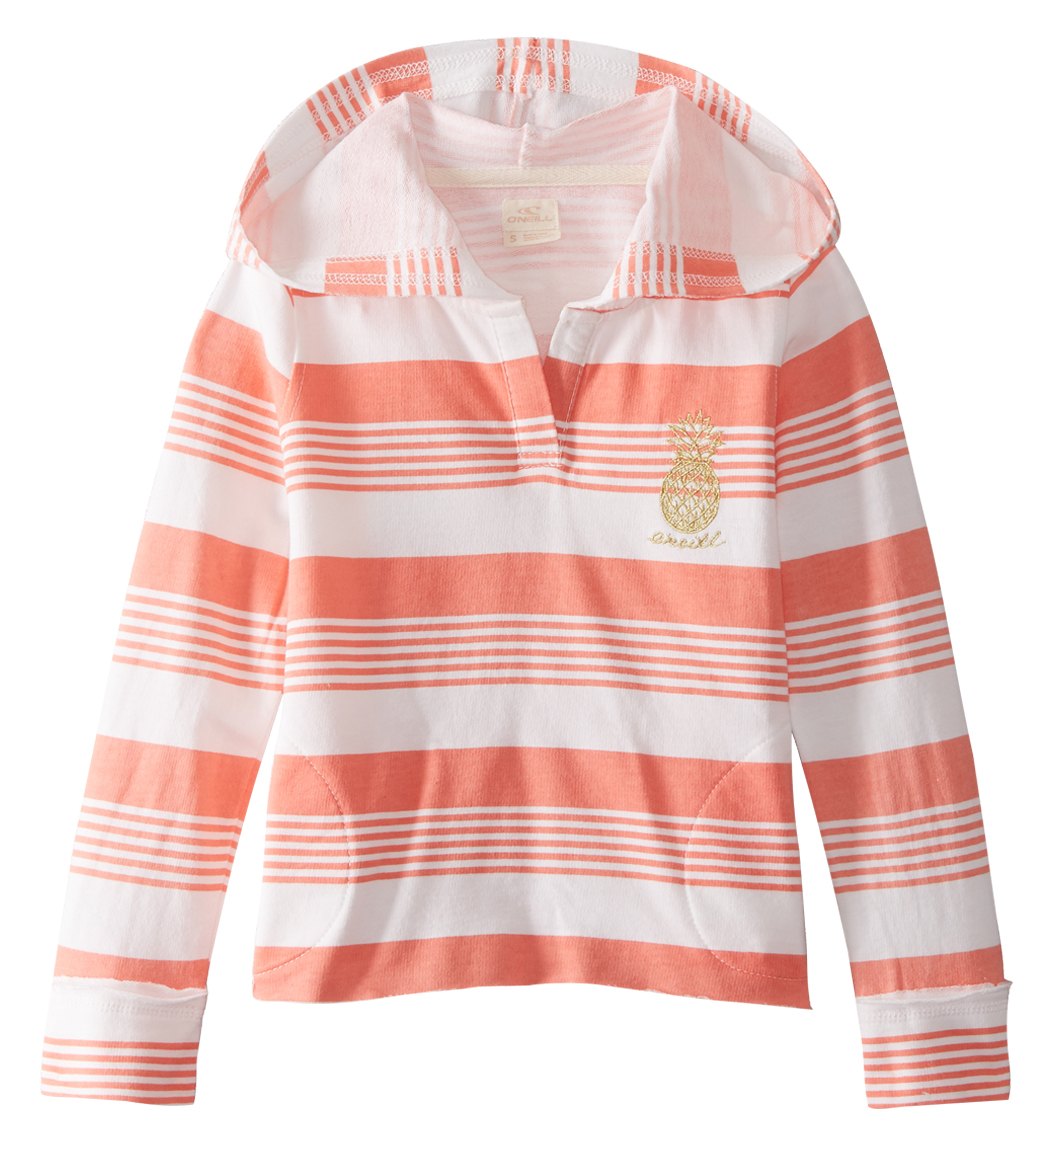 O'neill Girls' Playa Pull Over Hoodie Fleece Top - Coral 2T Cotton - Swimoutlet.com